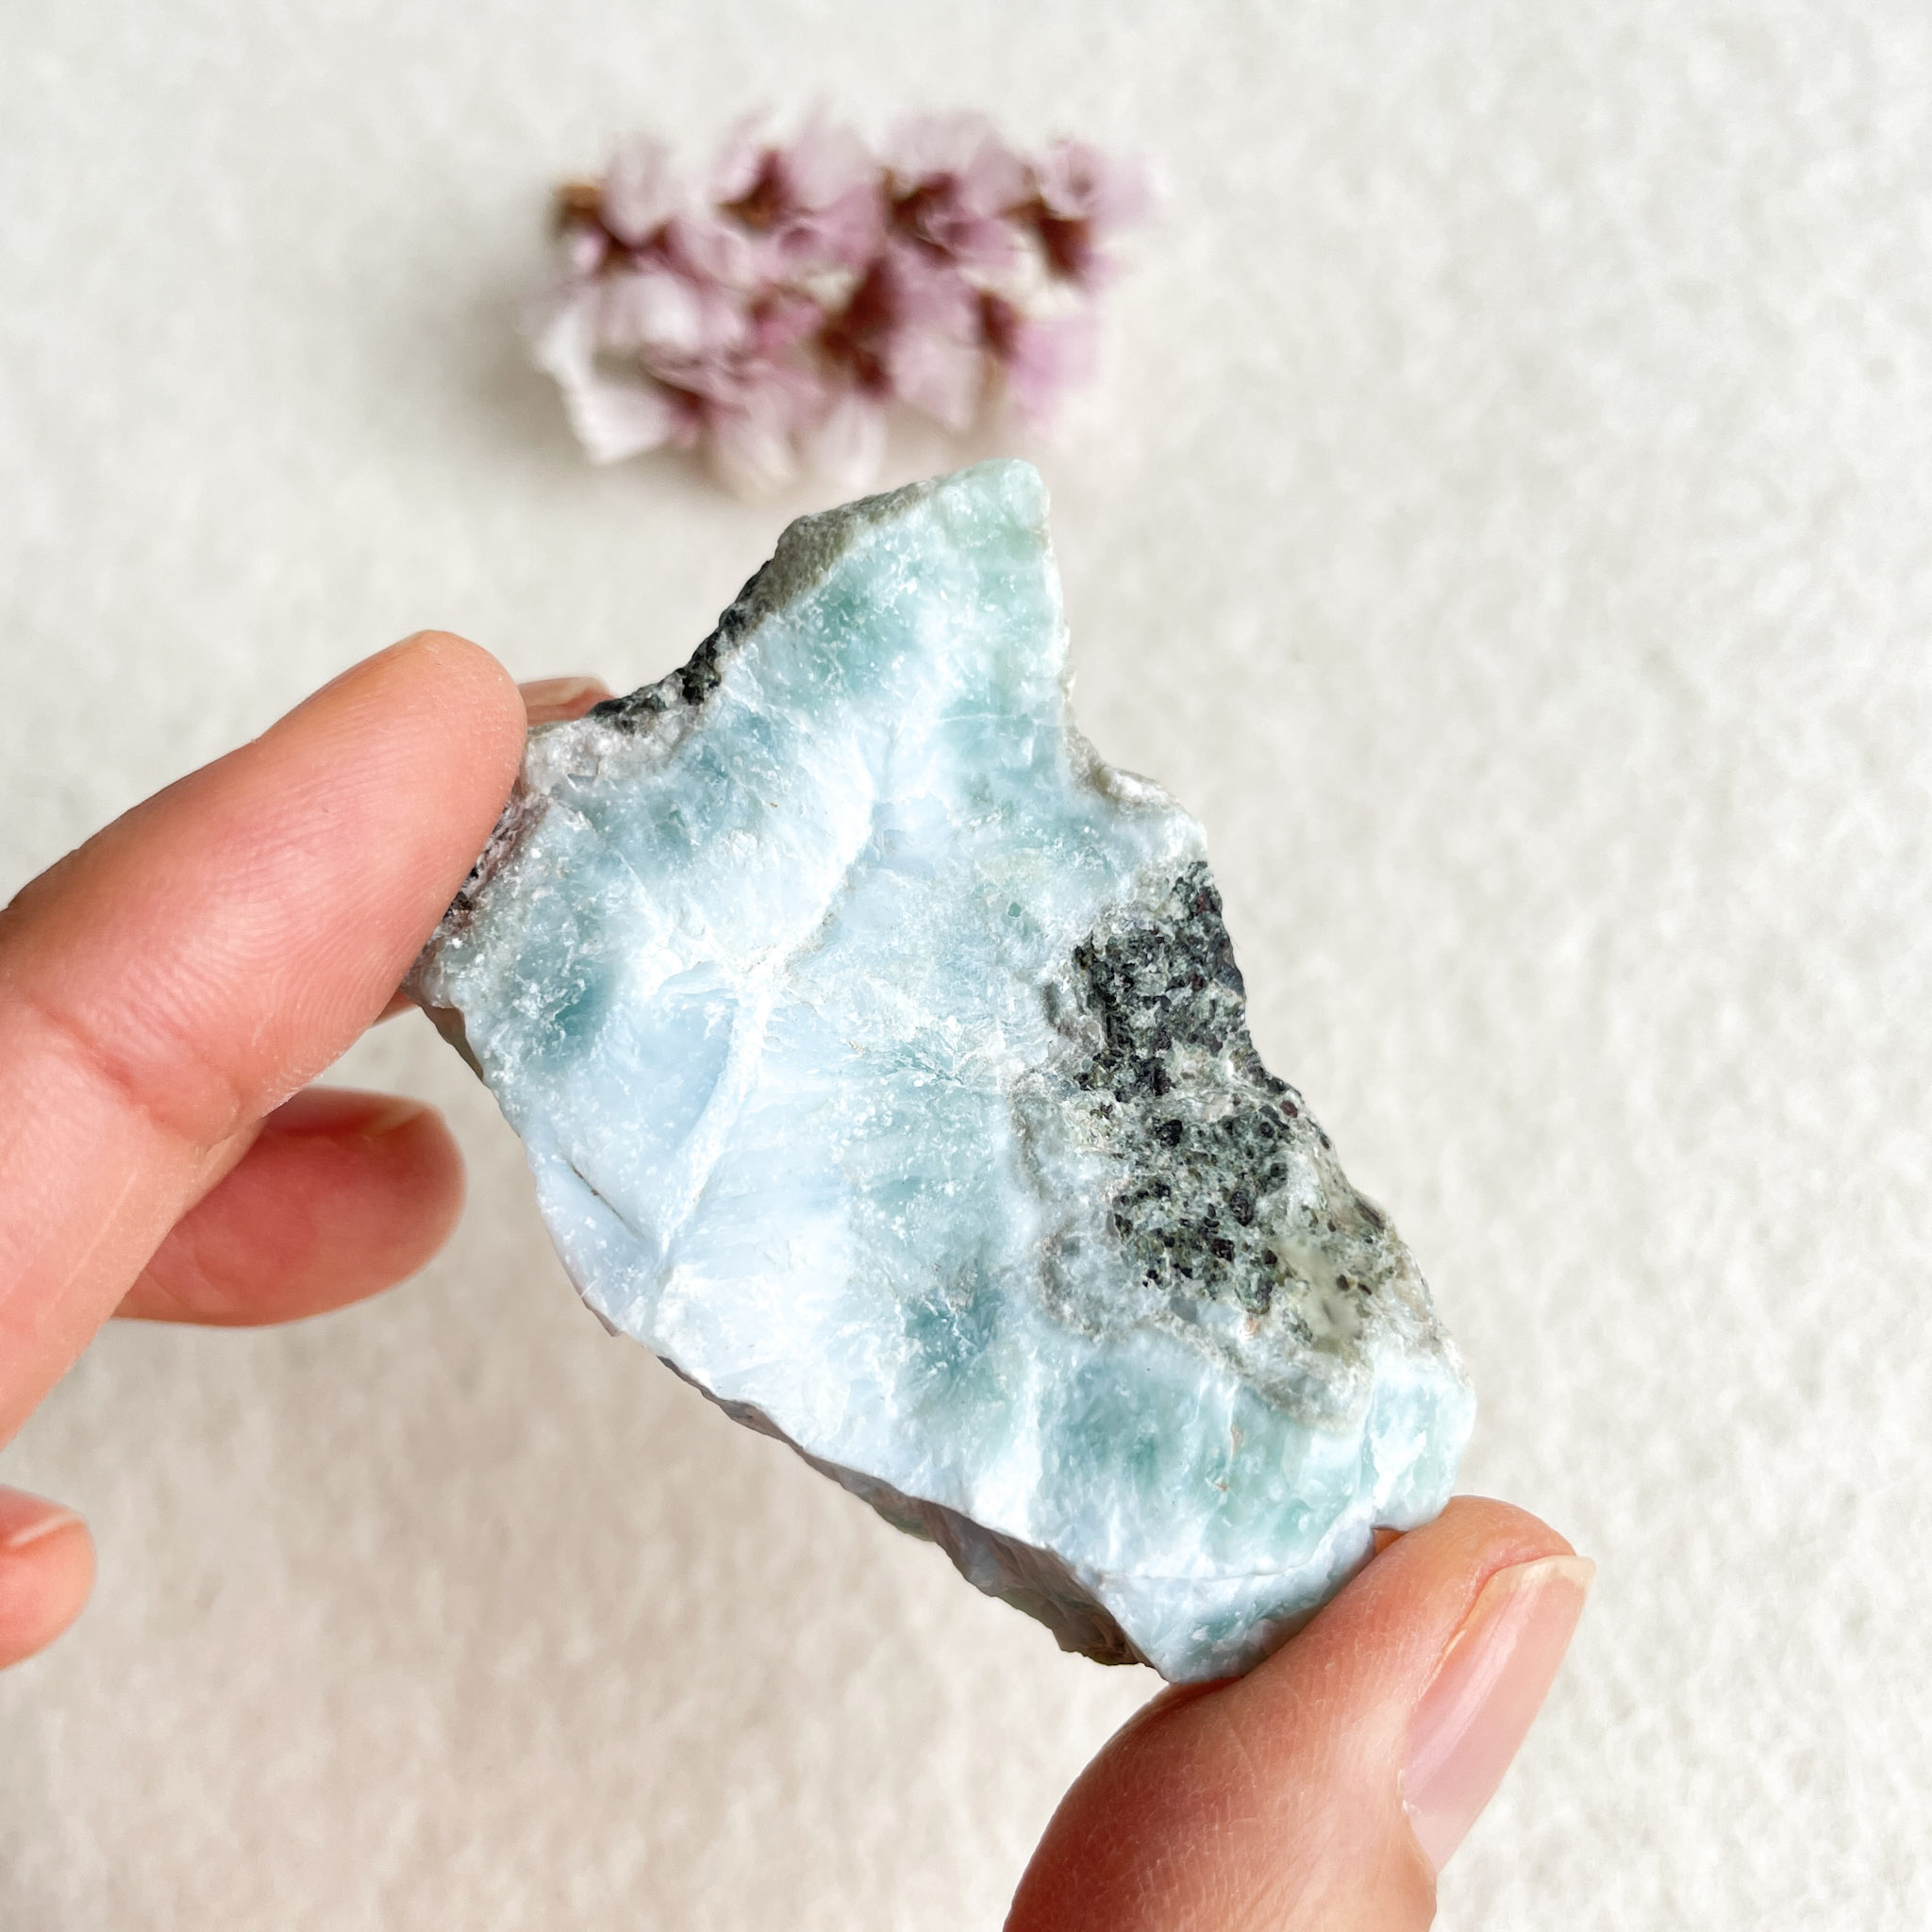 A hand holding a piece of light blue translucent raw mineral with natural edges against a white background, with small pink flowers blurred in the distance.